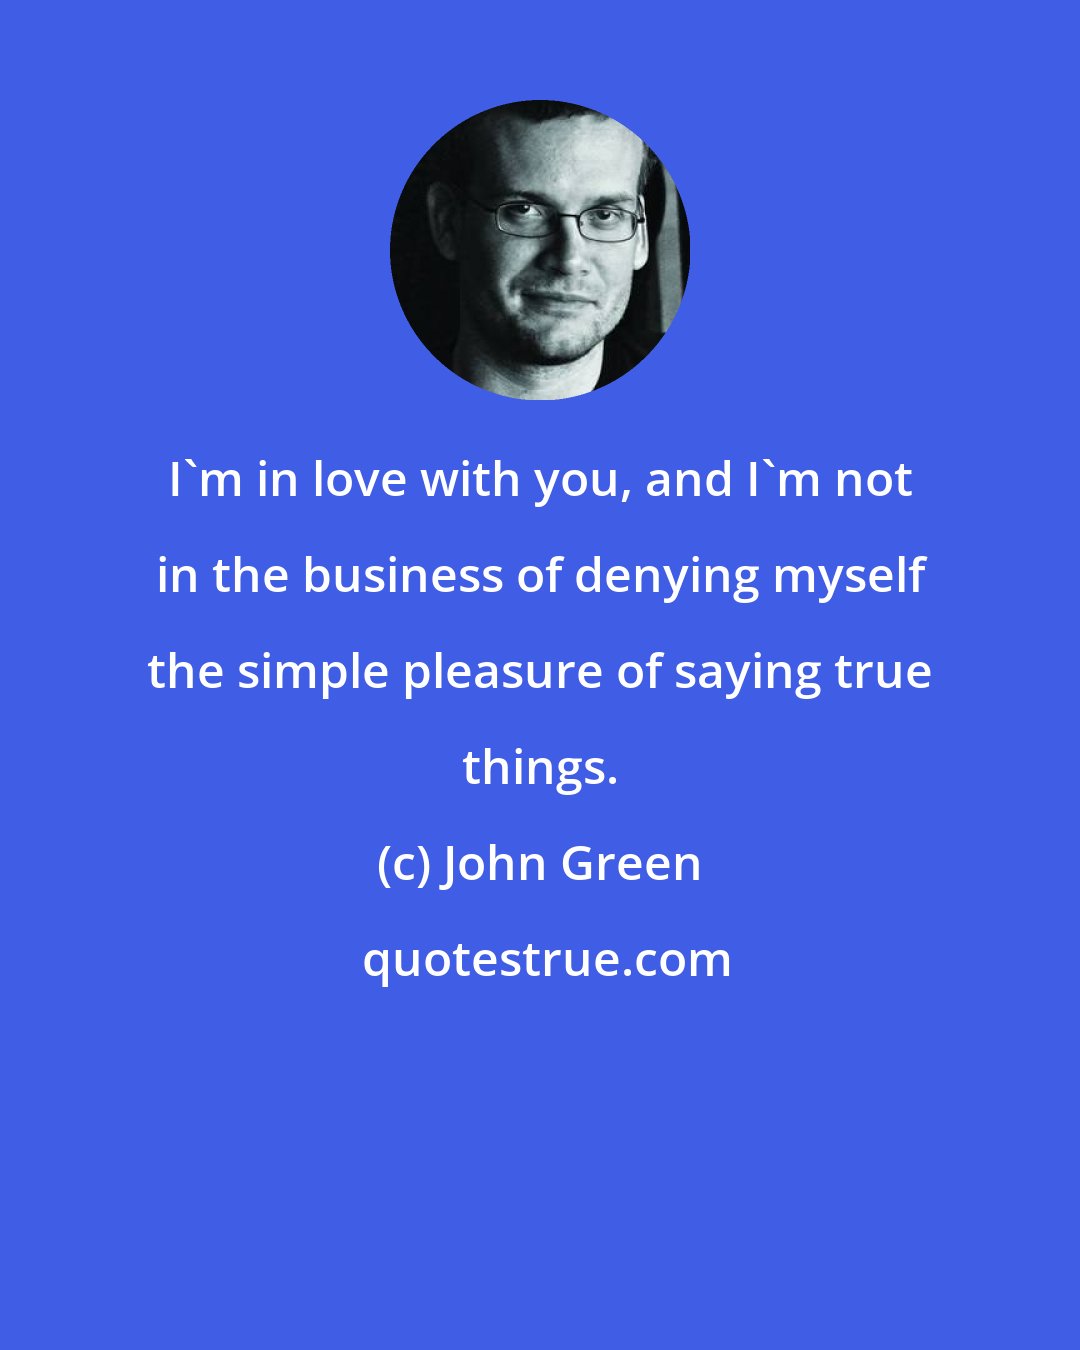 John Green: I'm in love with you, and I'm not in the business of denying myself the simple pleasure of saying true things.